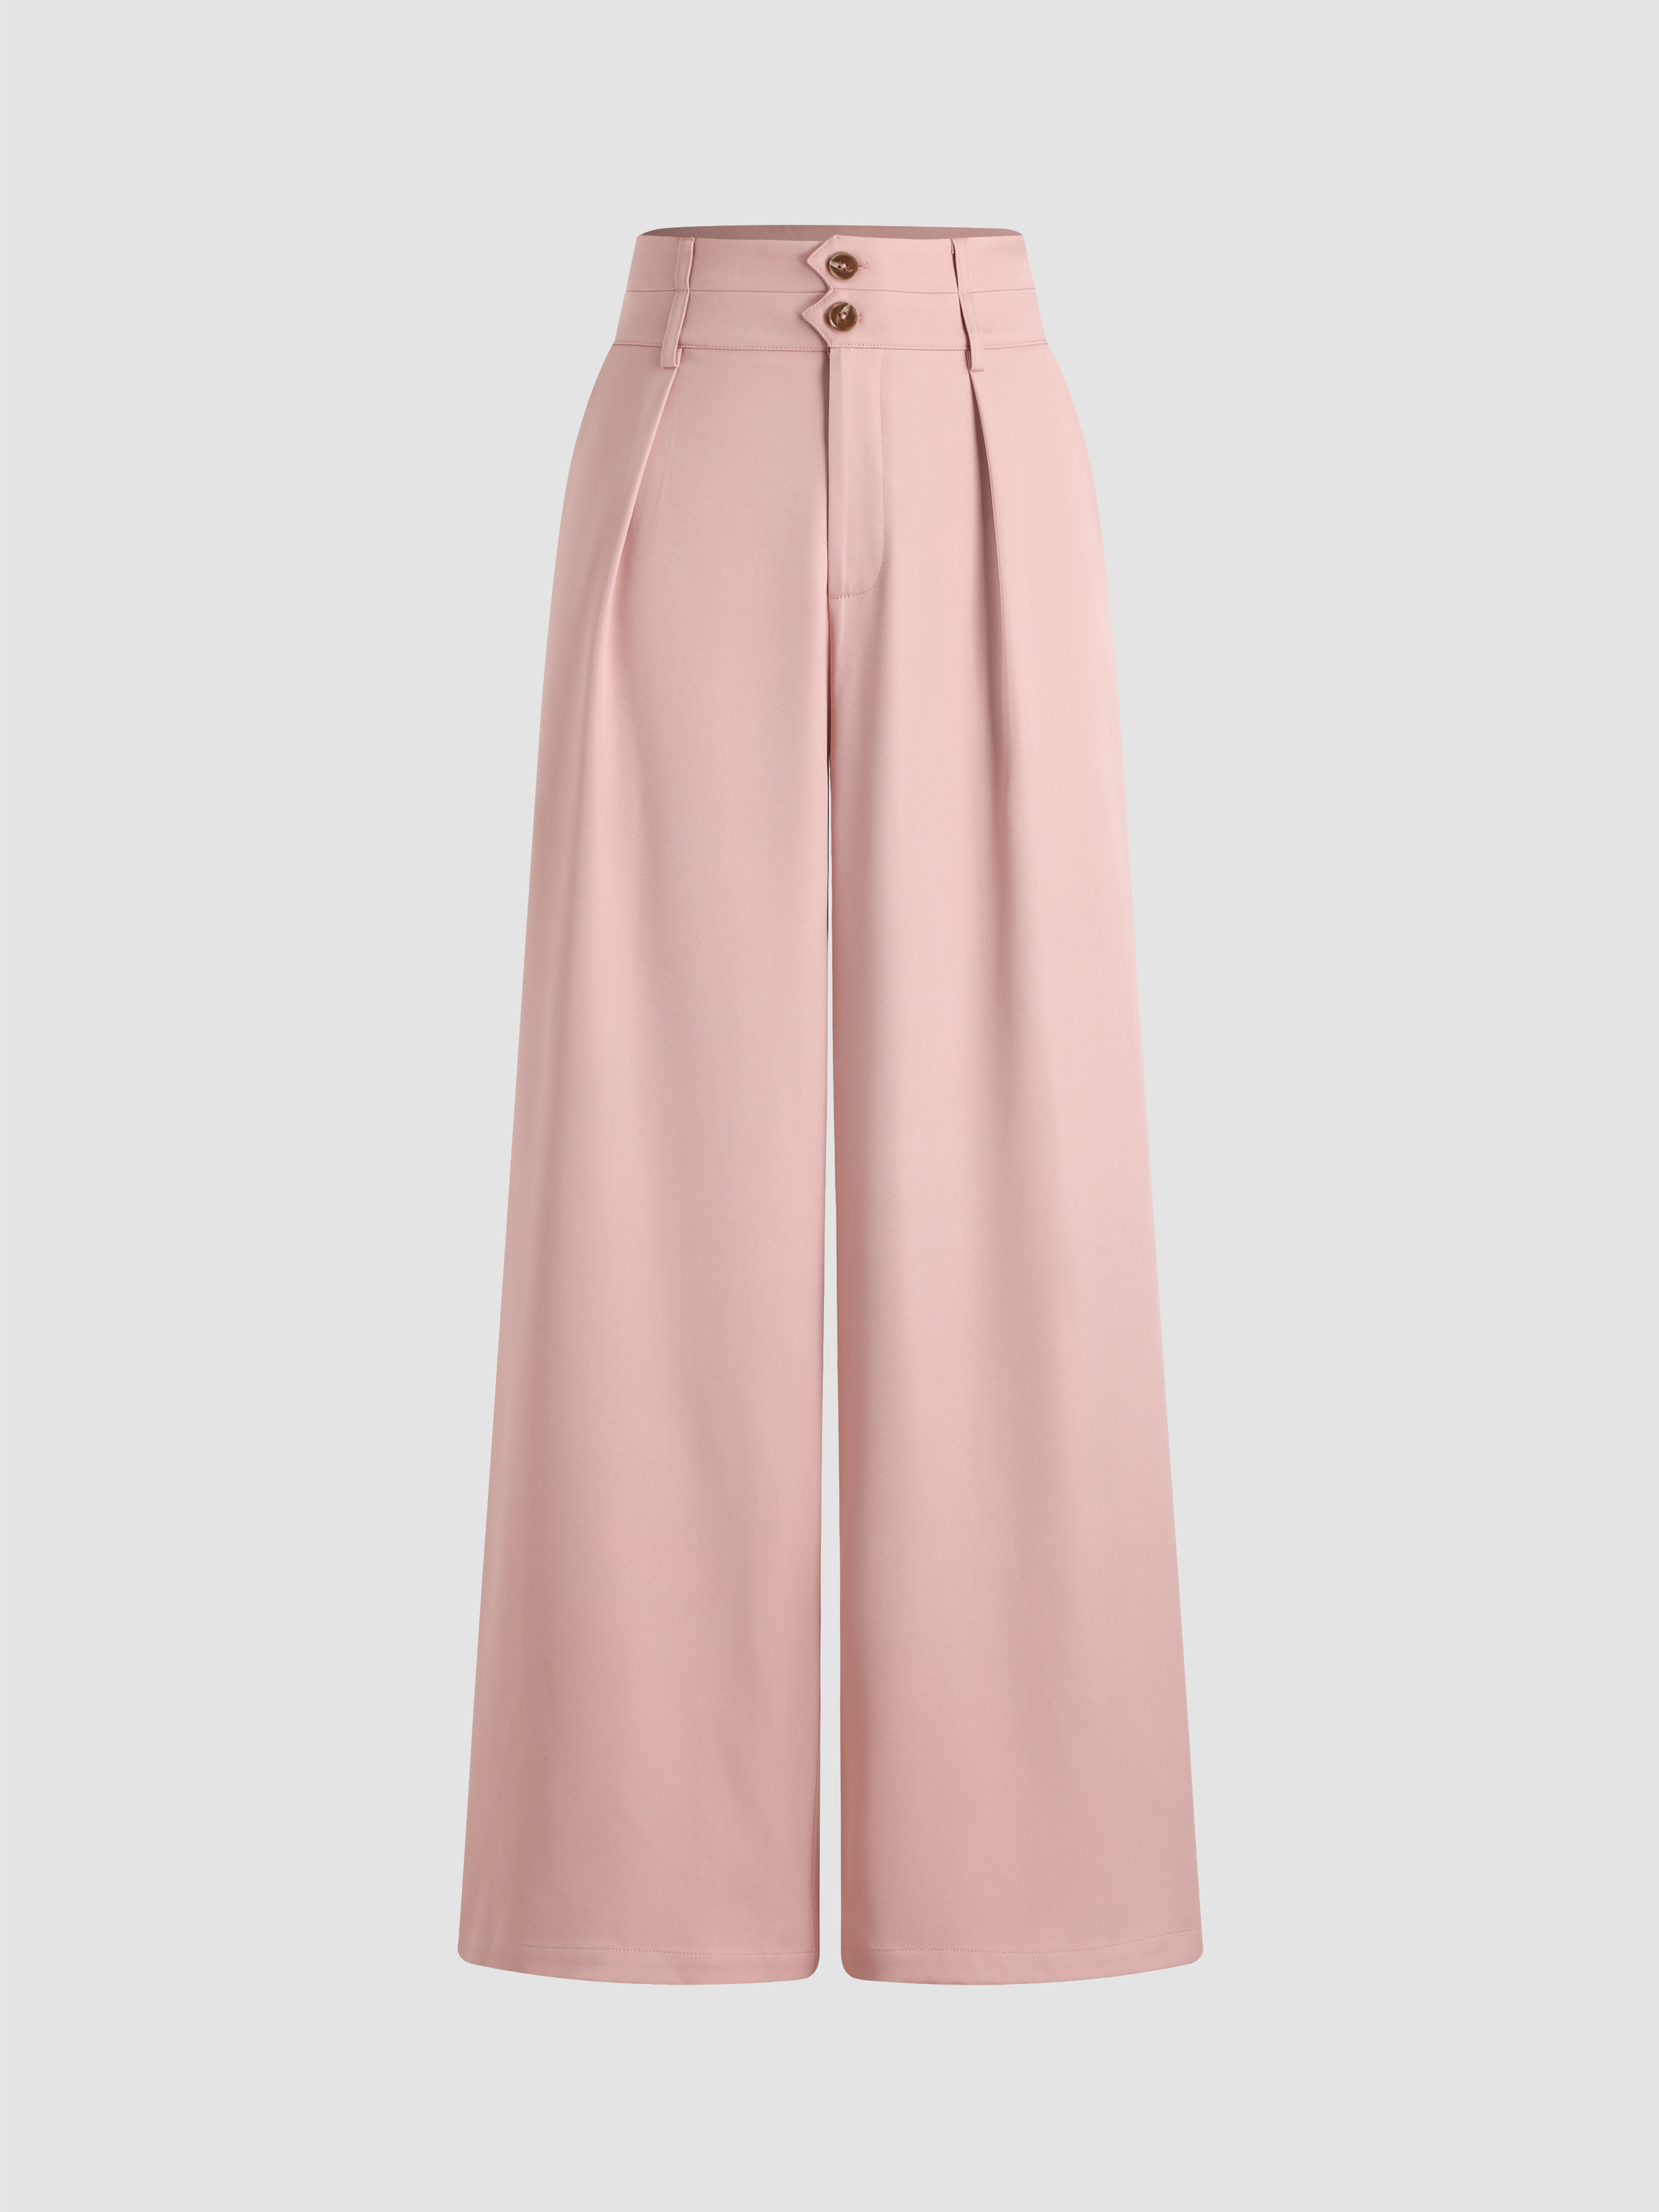 PLAZZO-PAIR Flared Women Pink Trousers - Buy PLAZZO-PAIR Flared Women Pink  Trousers Online at Best Prices in India | Flipkart.com